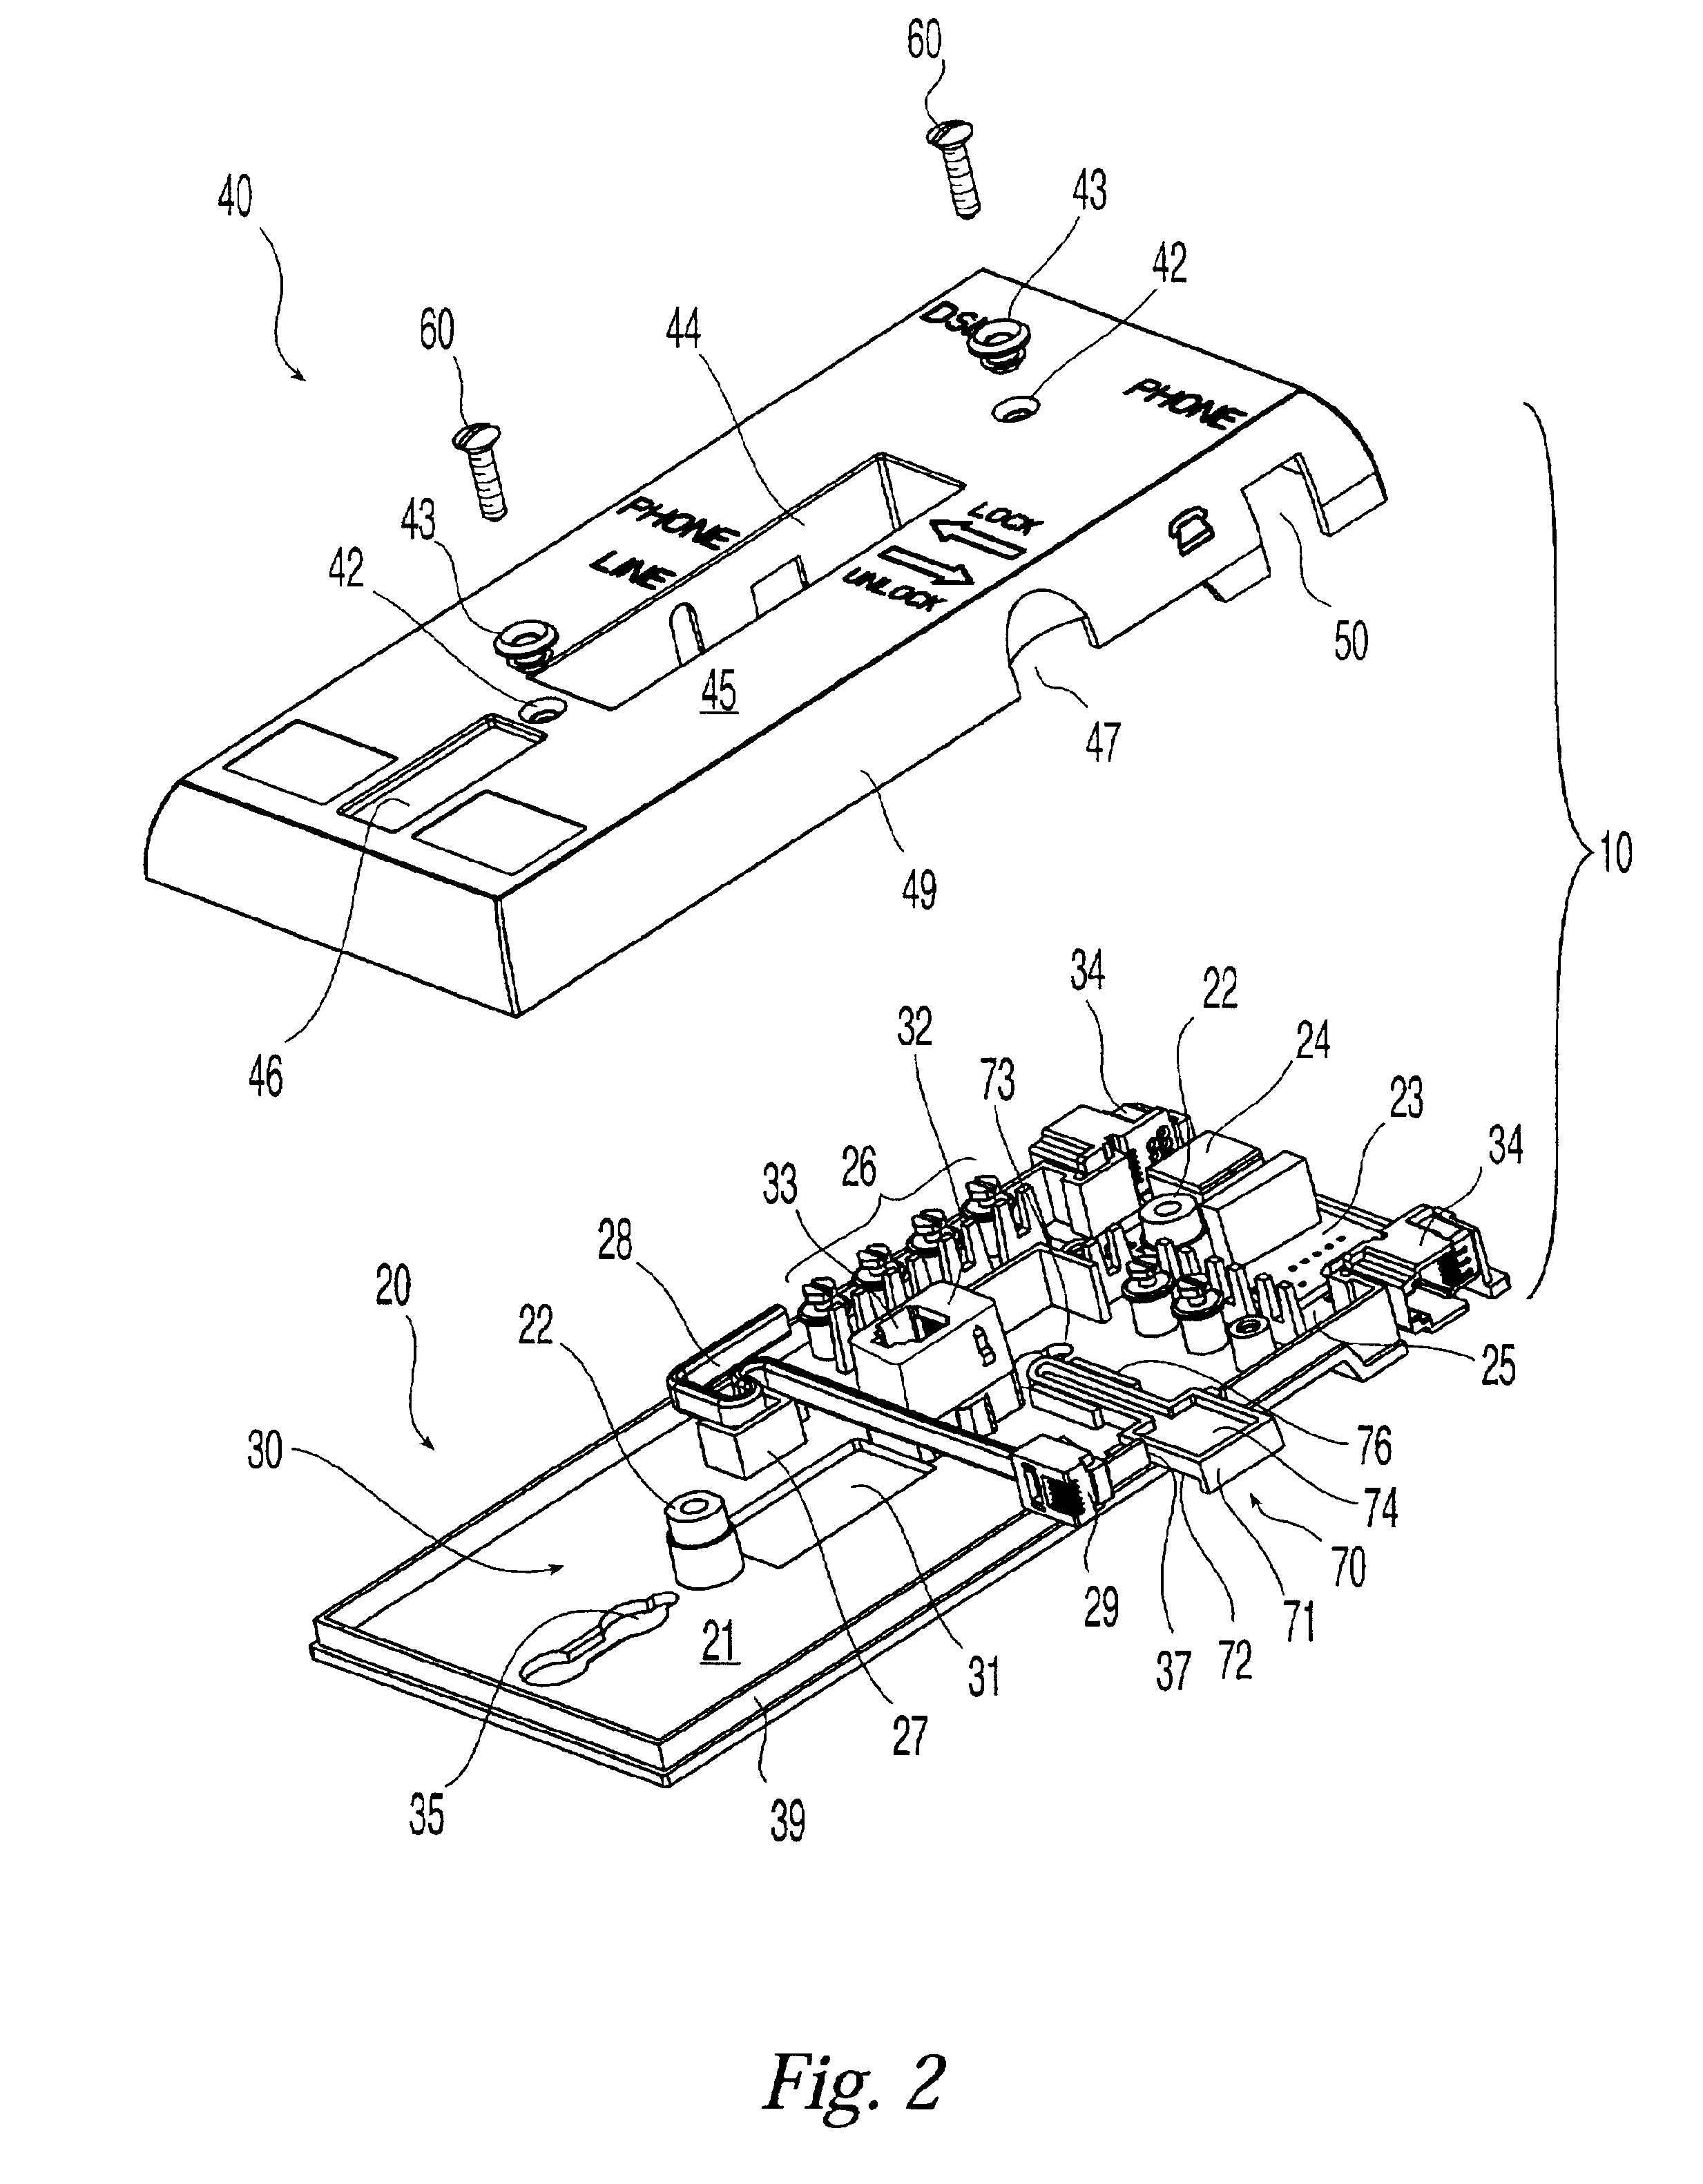 Tool-less wall-mount distributed filter housing